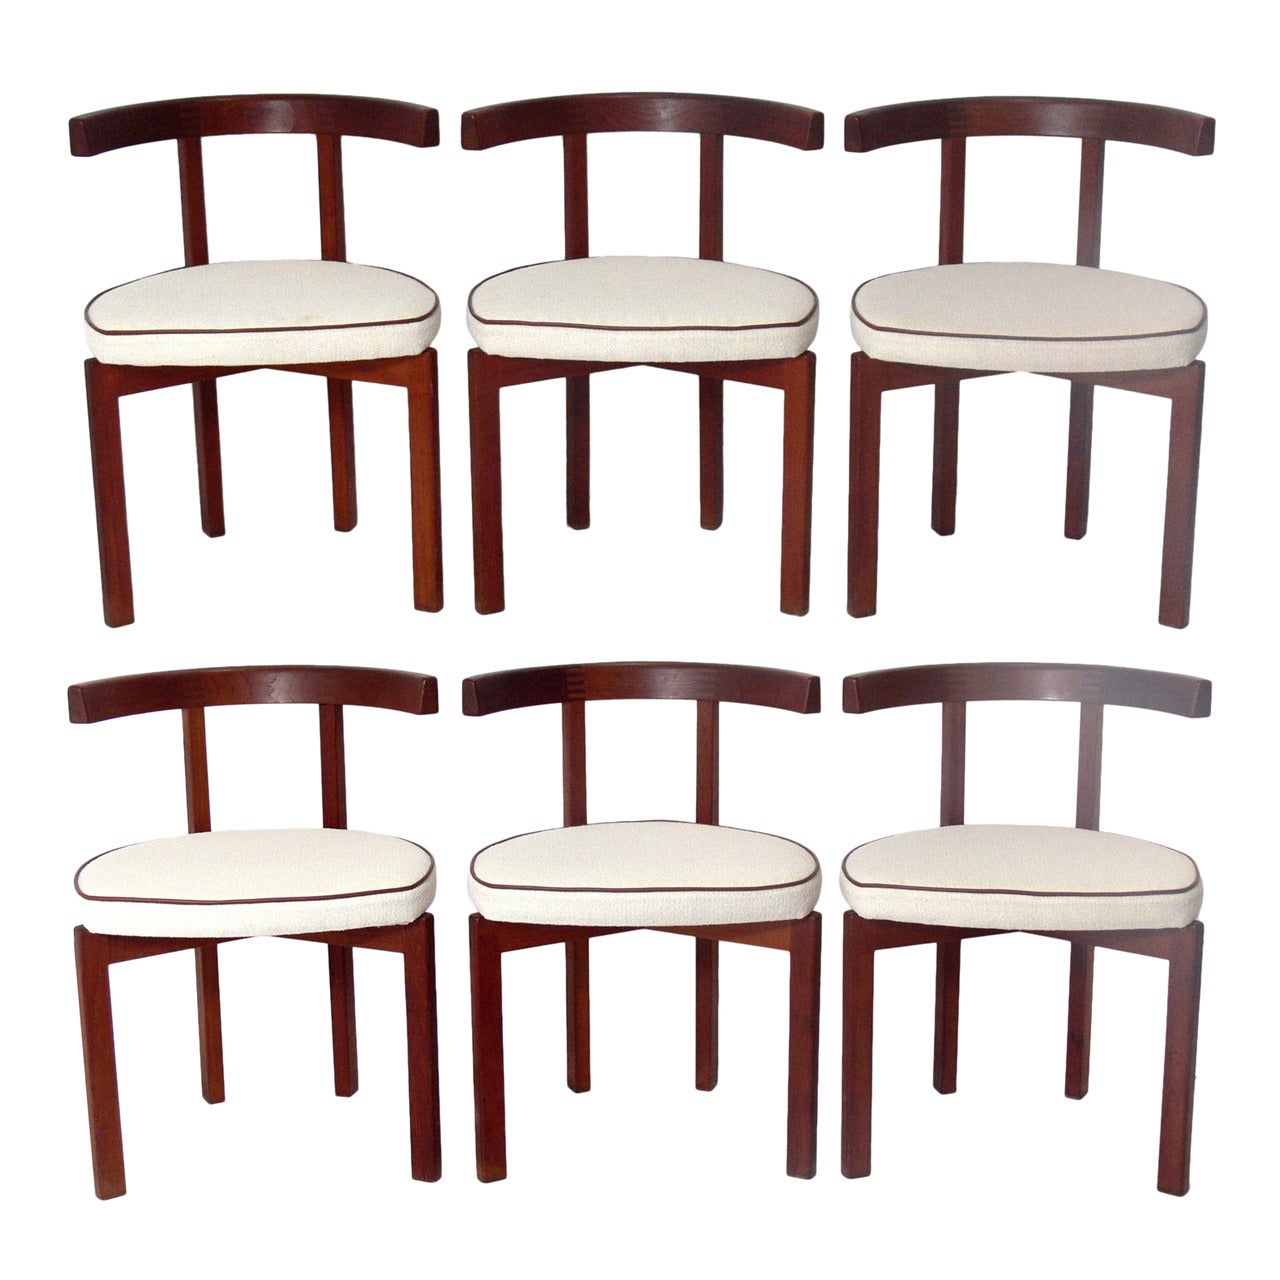 Set of Six Danish Modern Dining Chairs in the manner of Ole Wanscher